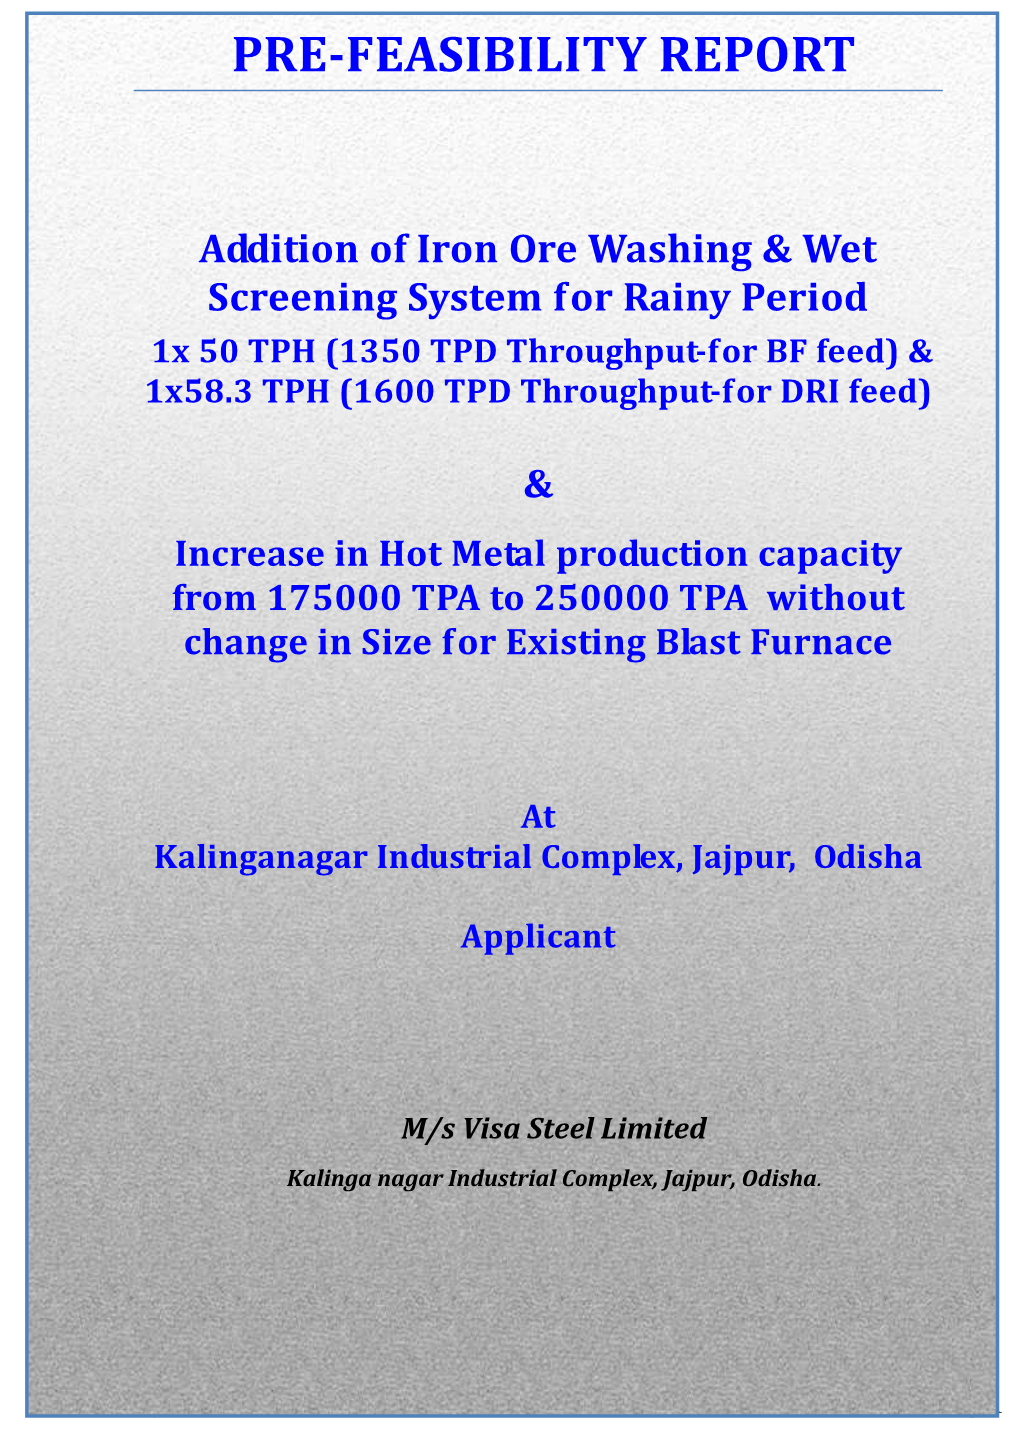 Pre-Feasibility Report for Addition of Wet Screening System to Blast Furnace & DRI for Iron Ore Processing